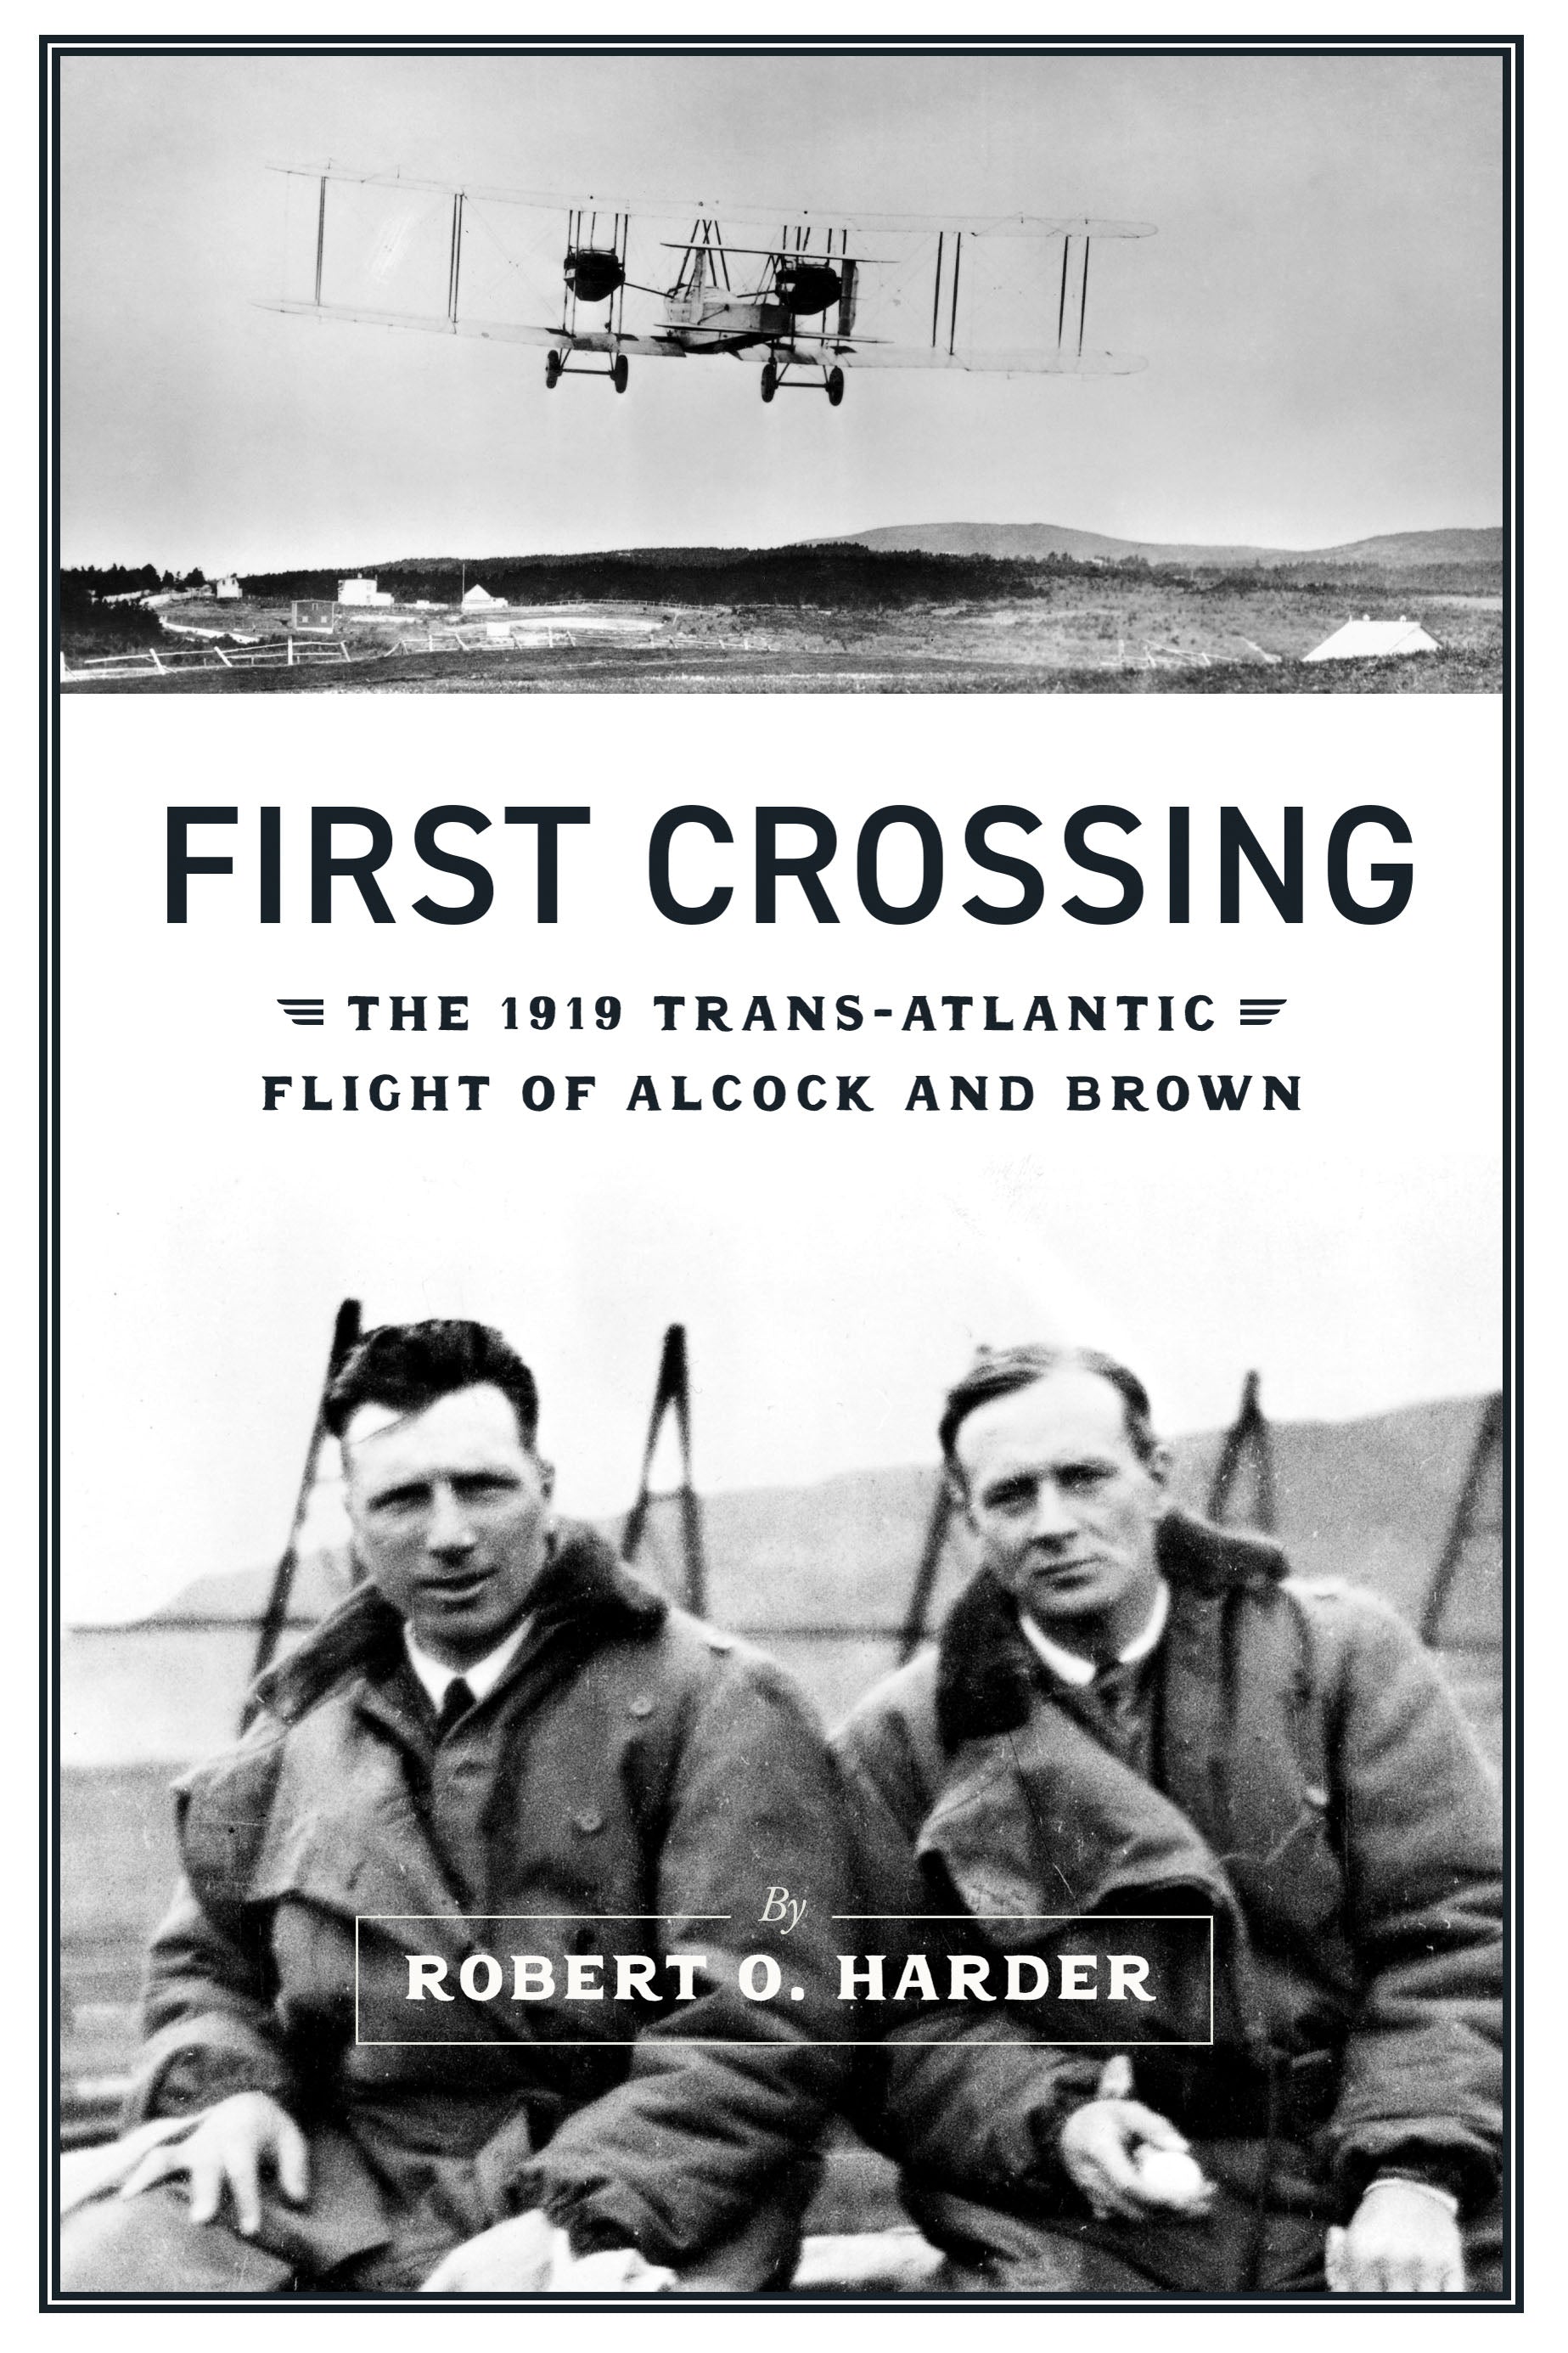 First Crossing: The 1919 Trans-Atlantic Flight of Alcock and Brown – Sunbury Press Bookstore